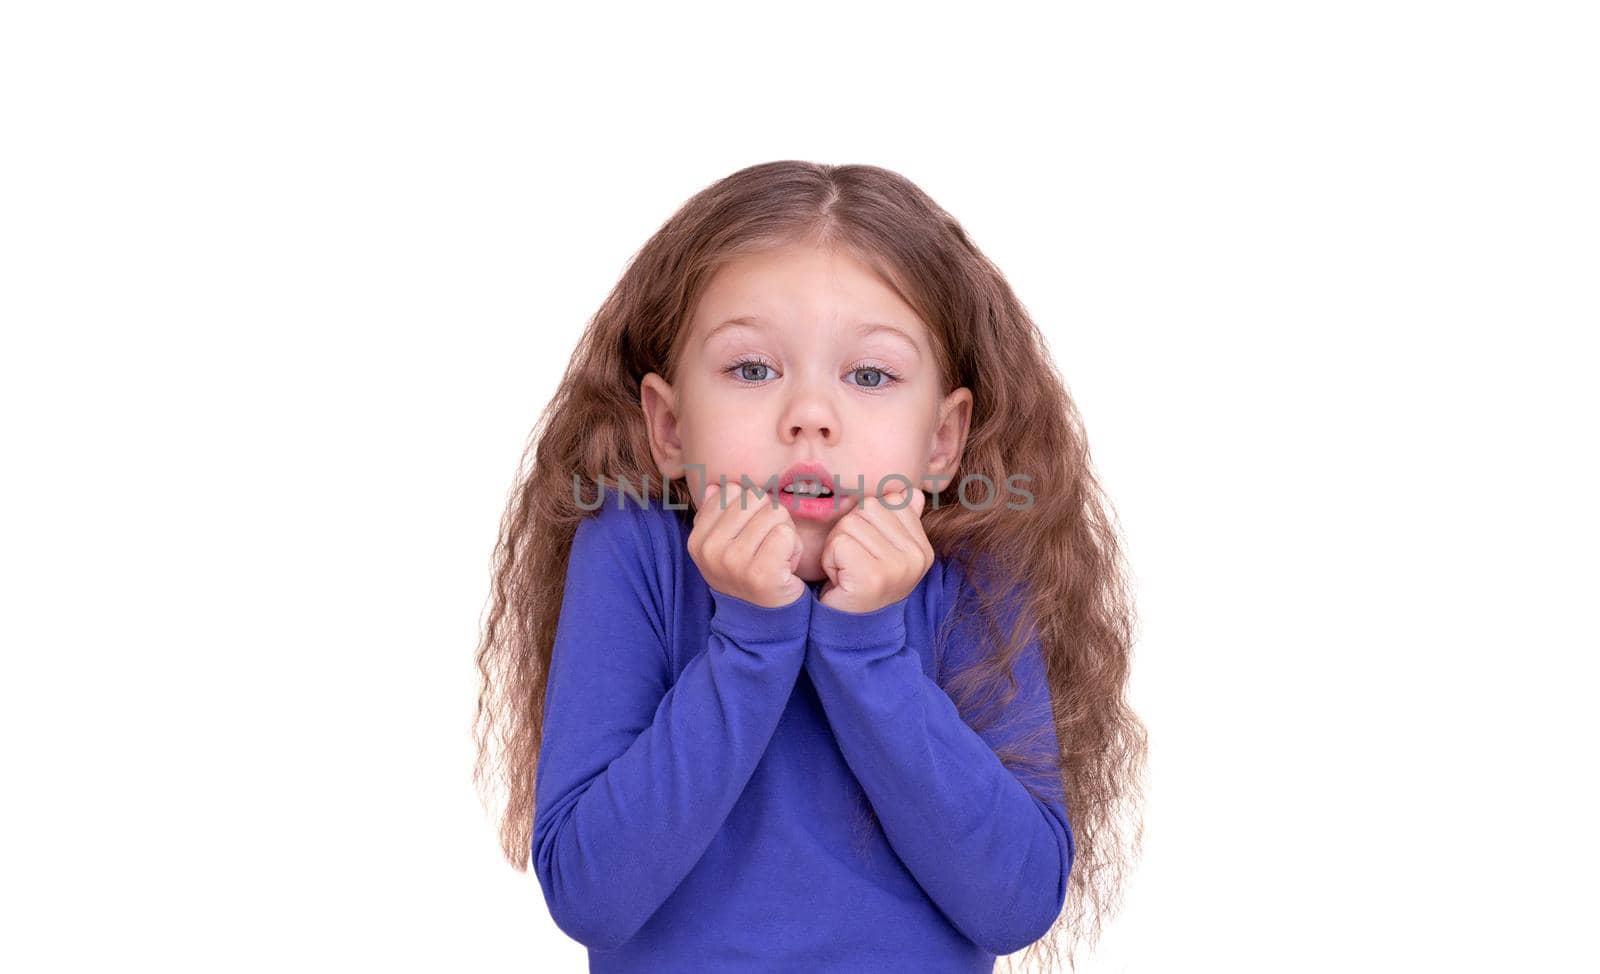 Freezing child kid feeling cold holding raised fists close to face because of coldness, isolated on white background looking at camera waist up caucasian little girl of 5 years in blue.